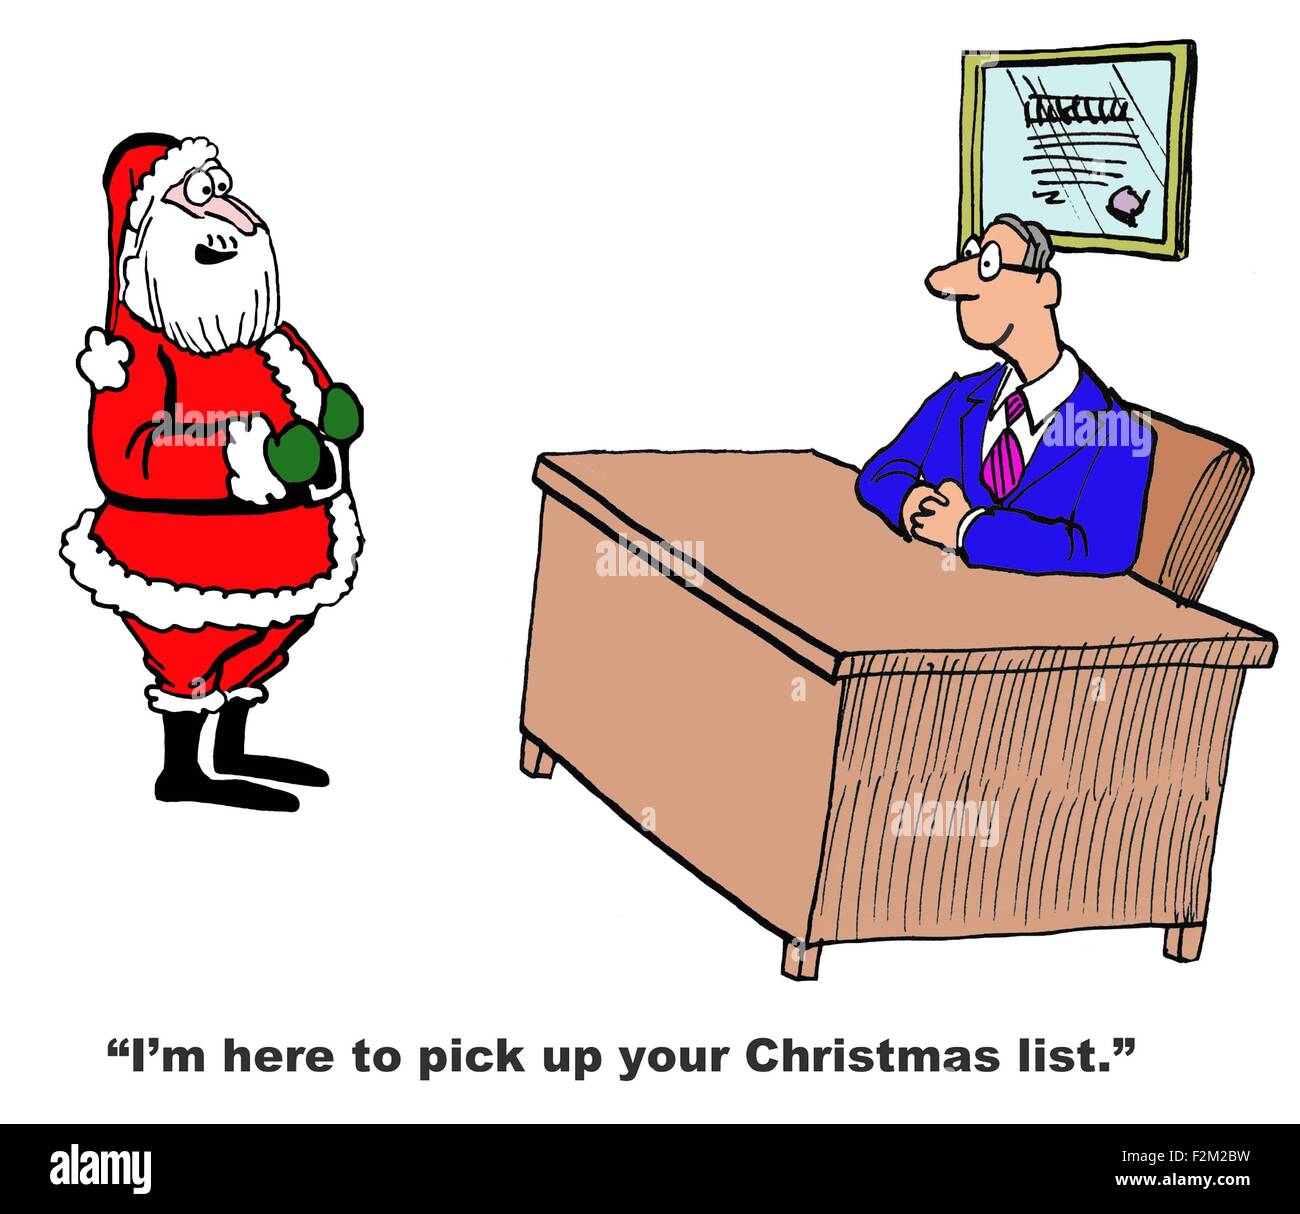 Christmas cartoon showing Santa Claus saying to manager, 'I'm here to pick  up your Christmas list' Stock Photo - Alamy